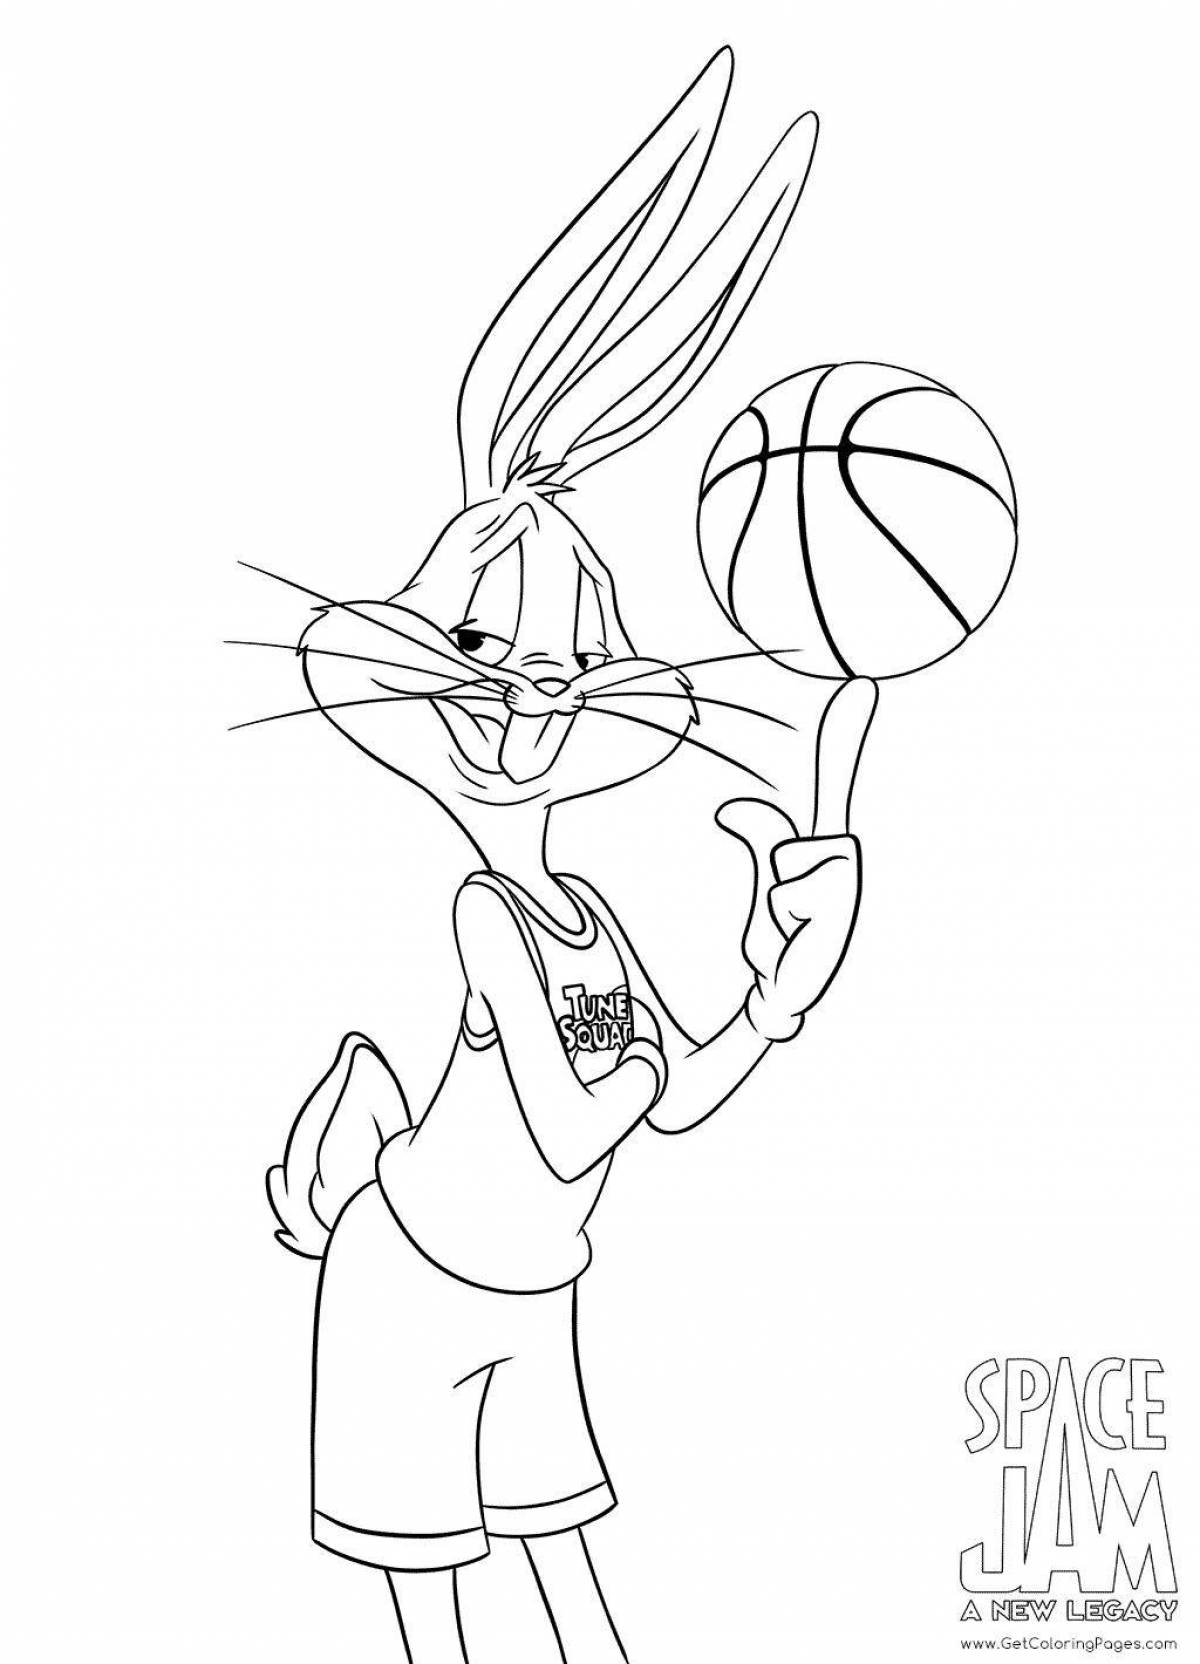 Bold Space Jam coloring page